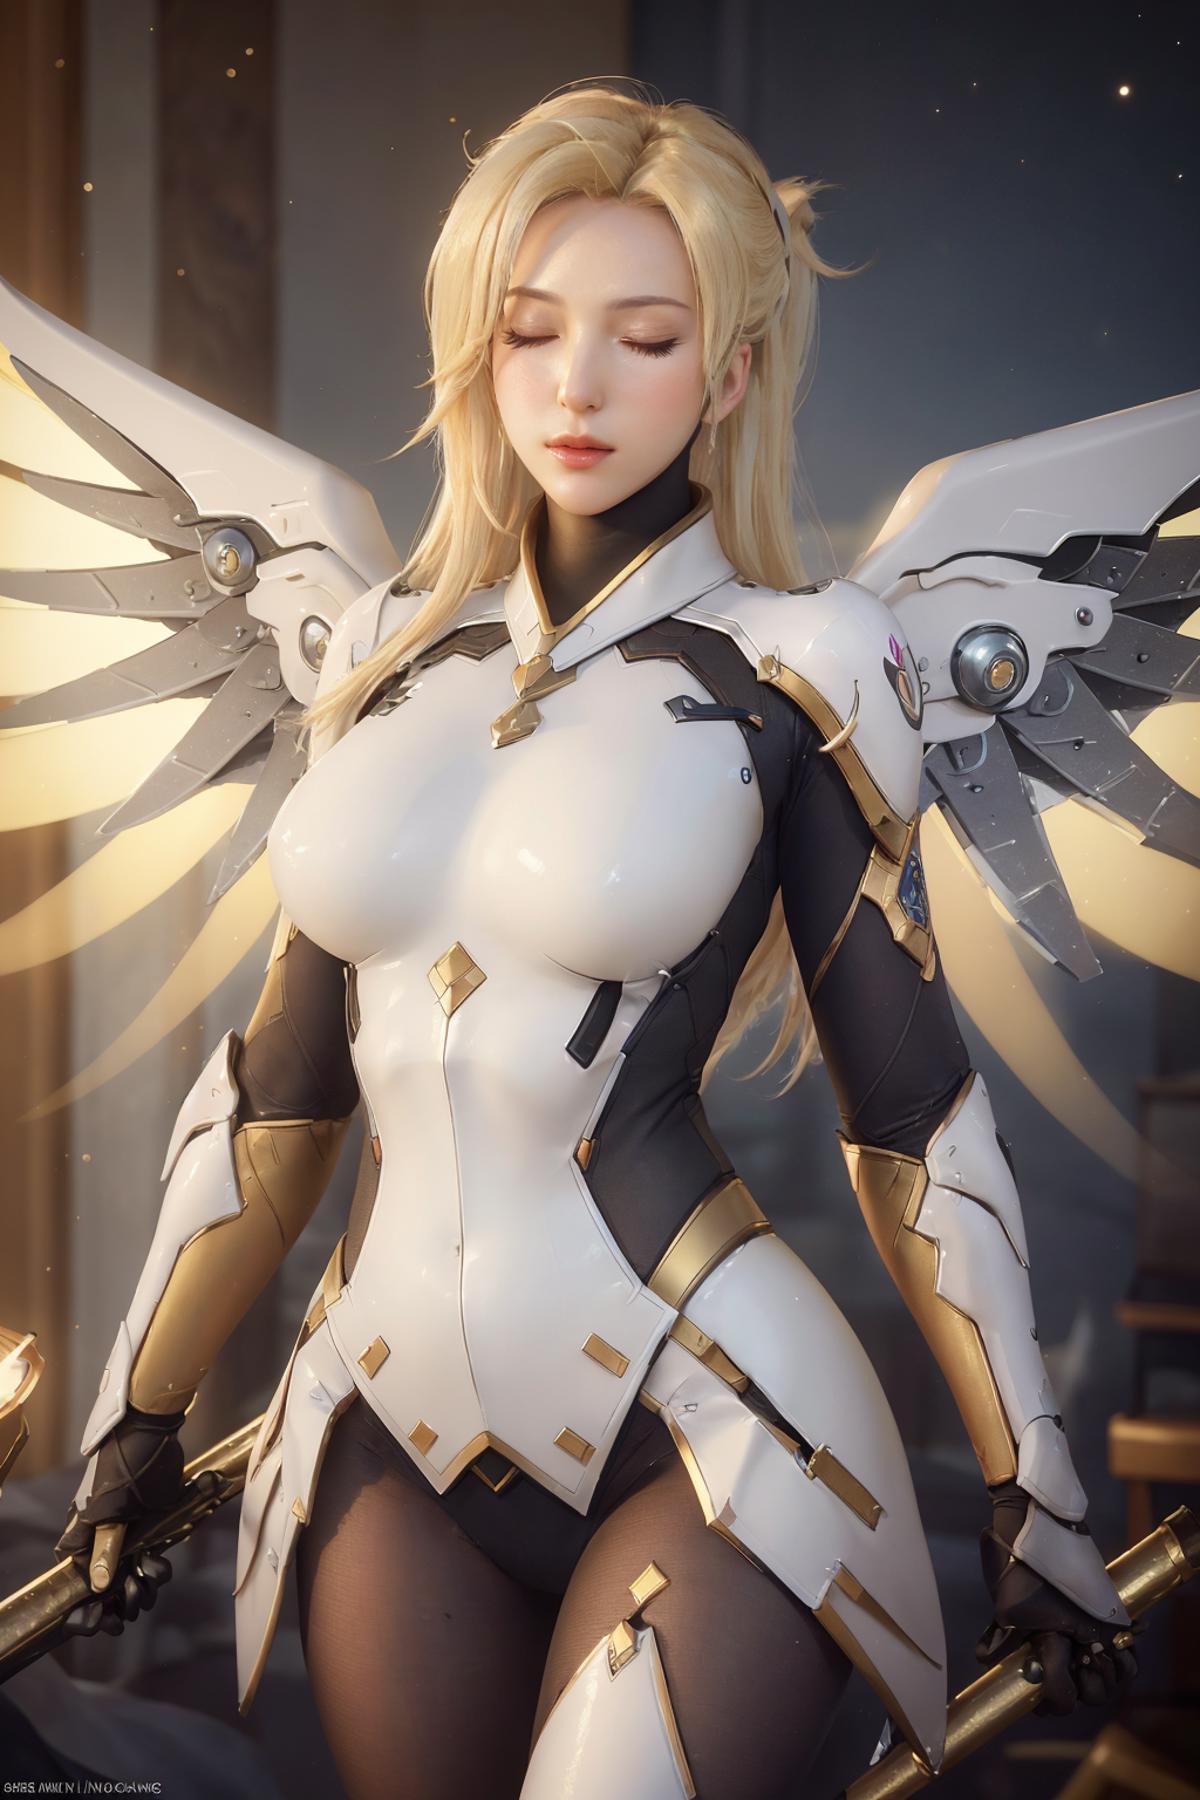 Not so Perfect - Mercy from Overwatch image by joyy114